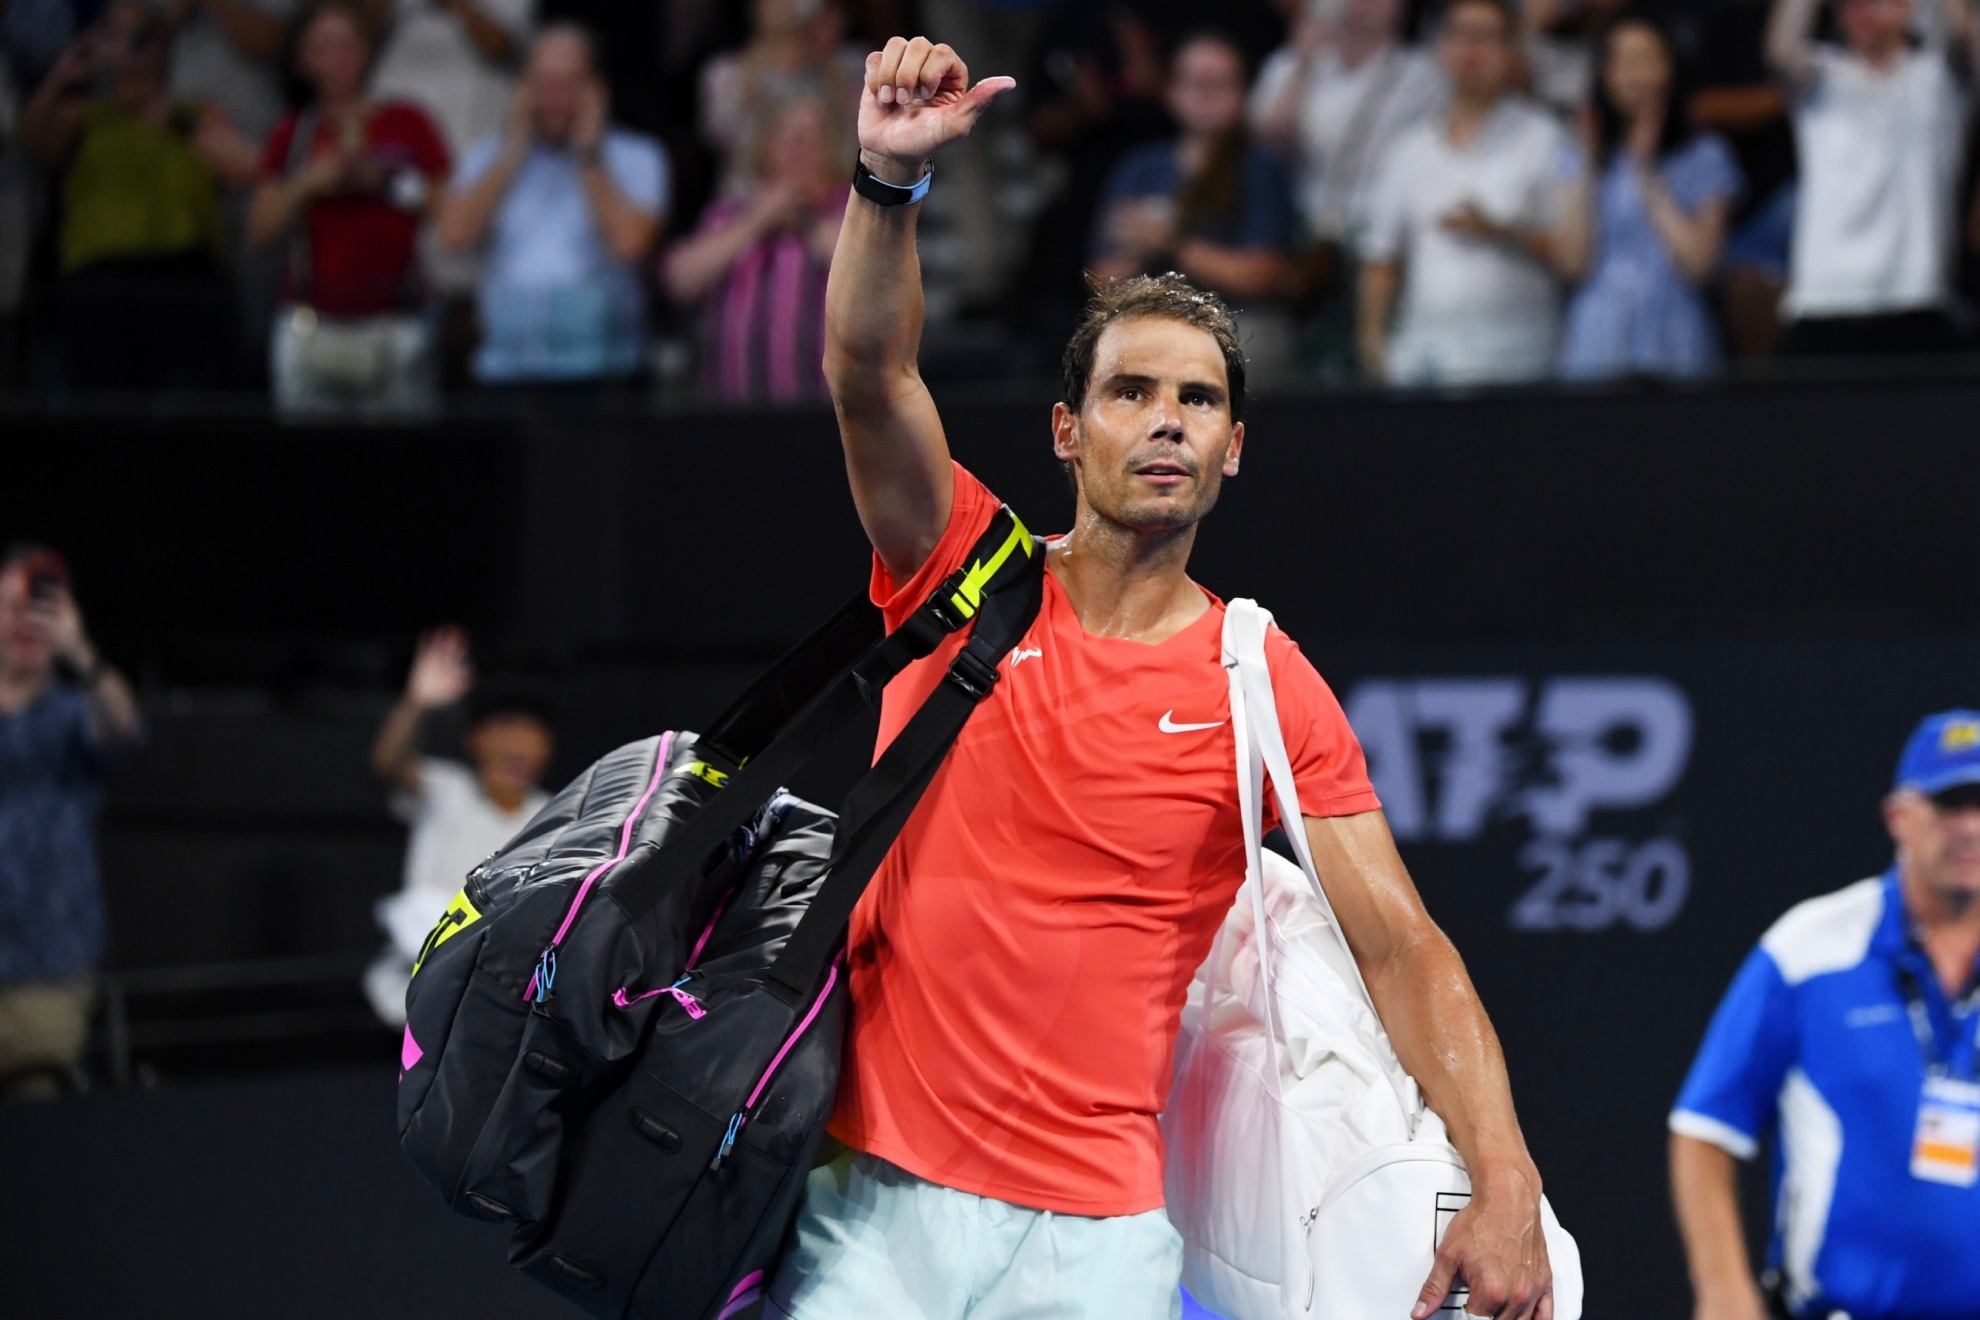 Nadal says goodbye to the stands in Brisbane on January 5